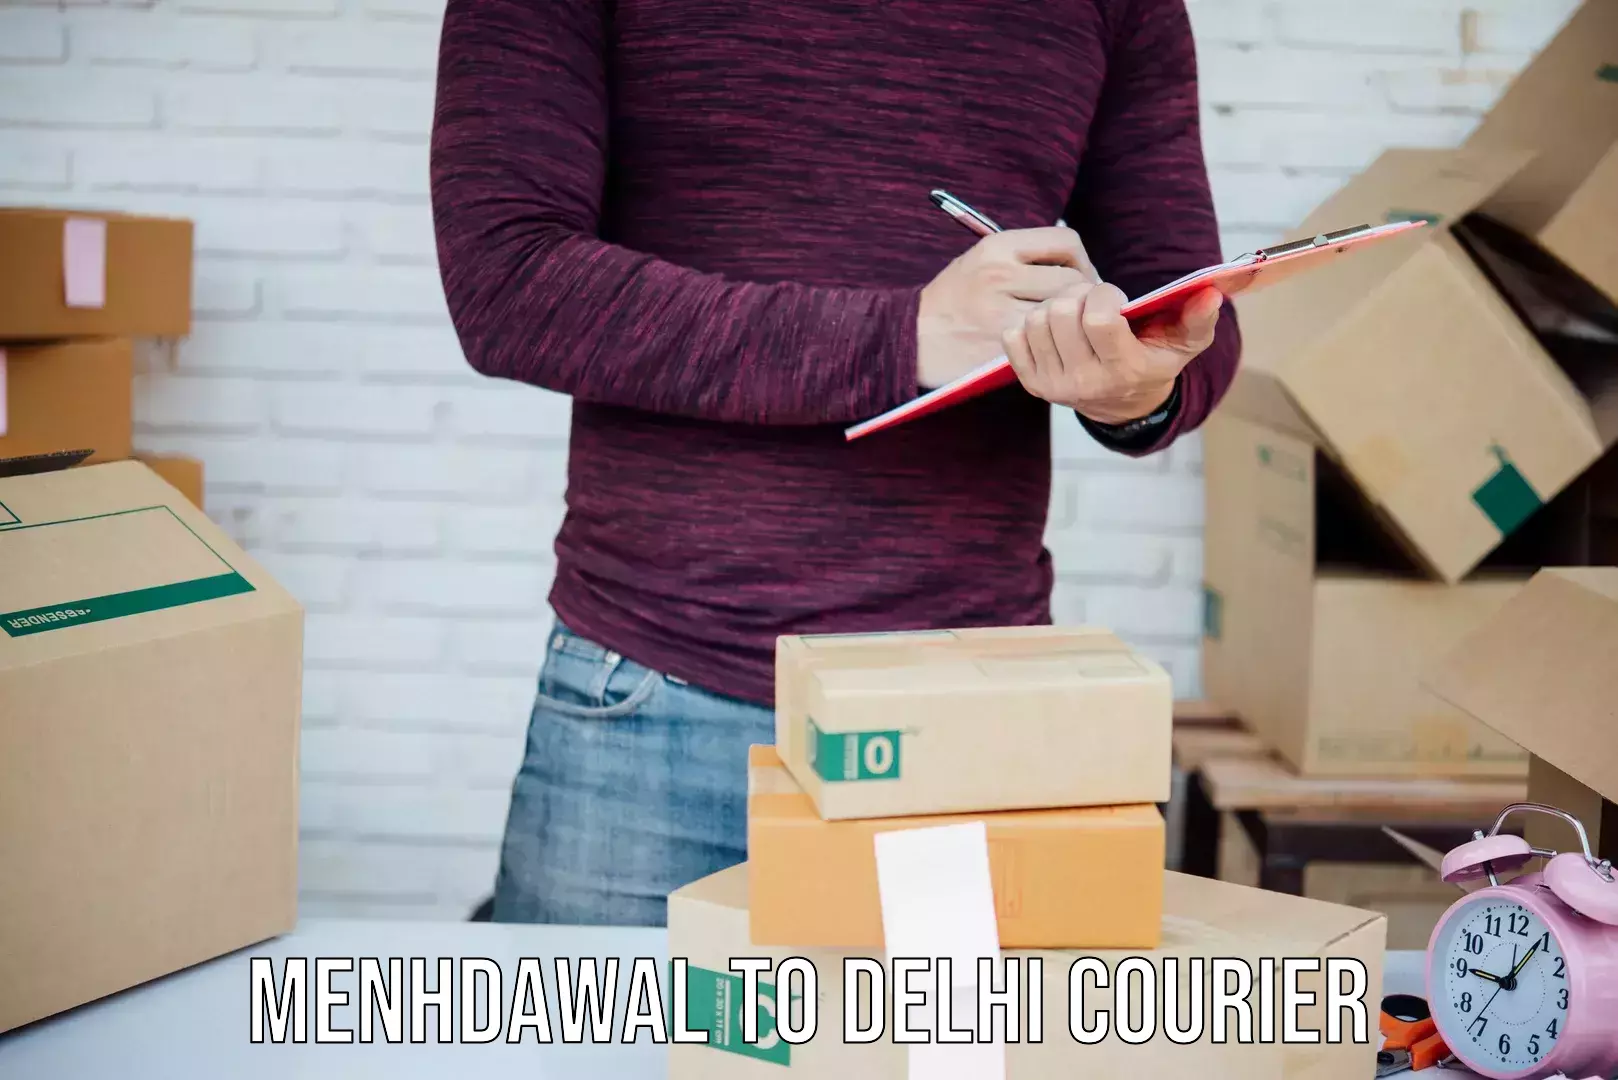 Cash on delivery service Menhdawal to University of Delhi